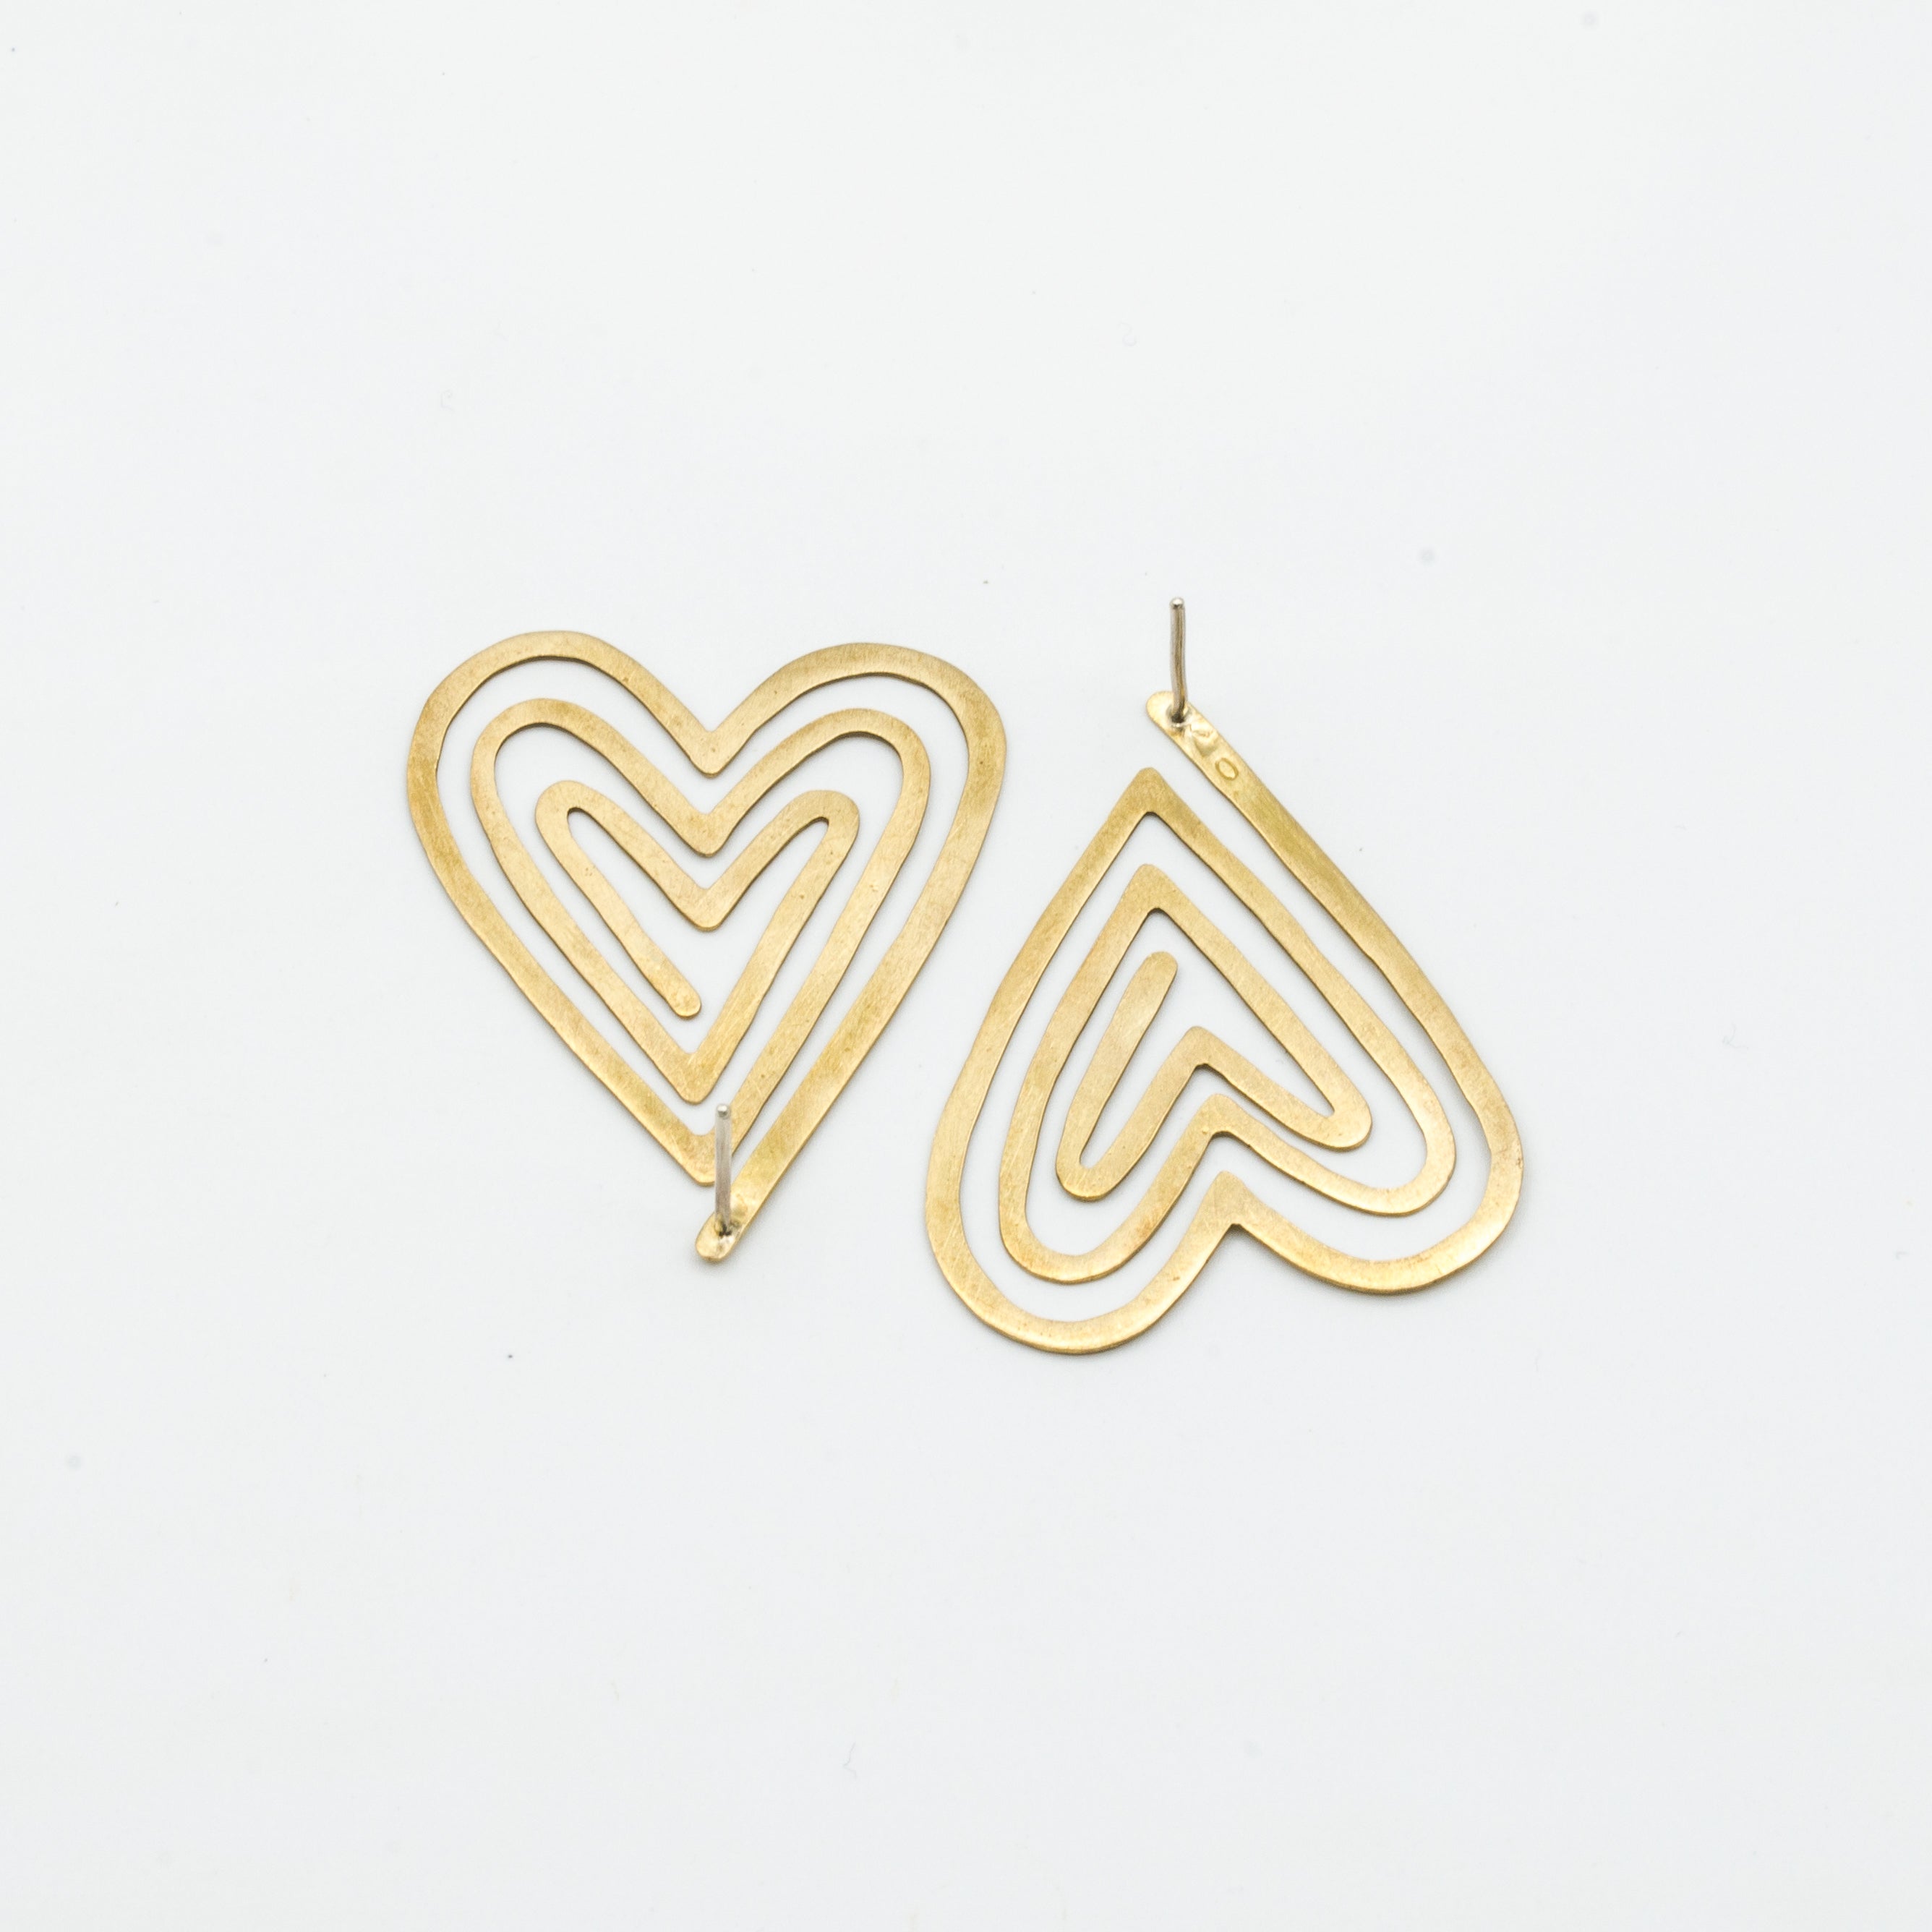 top view of backside of heart shaped stud earrings on white background